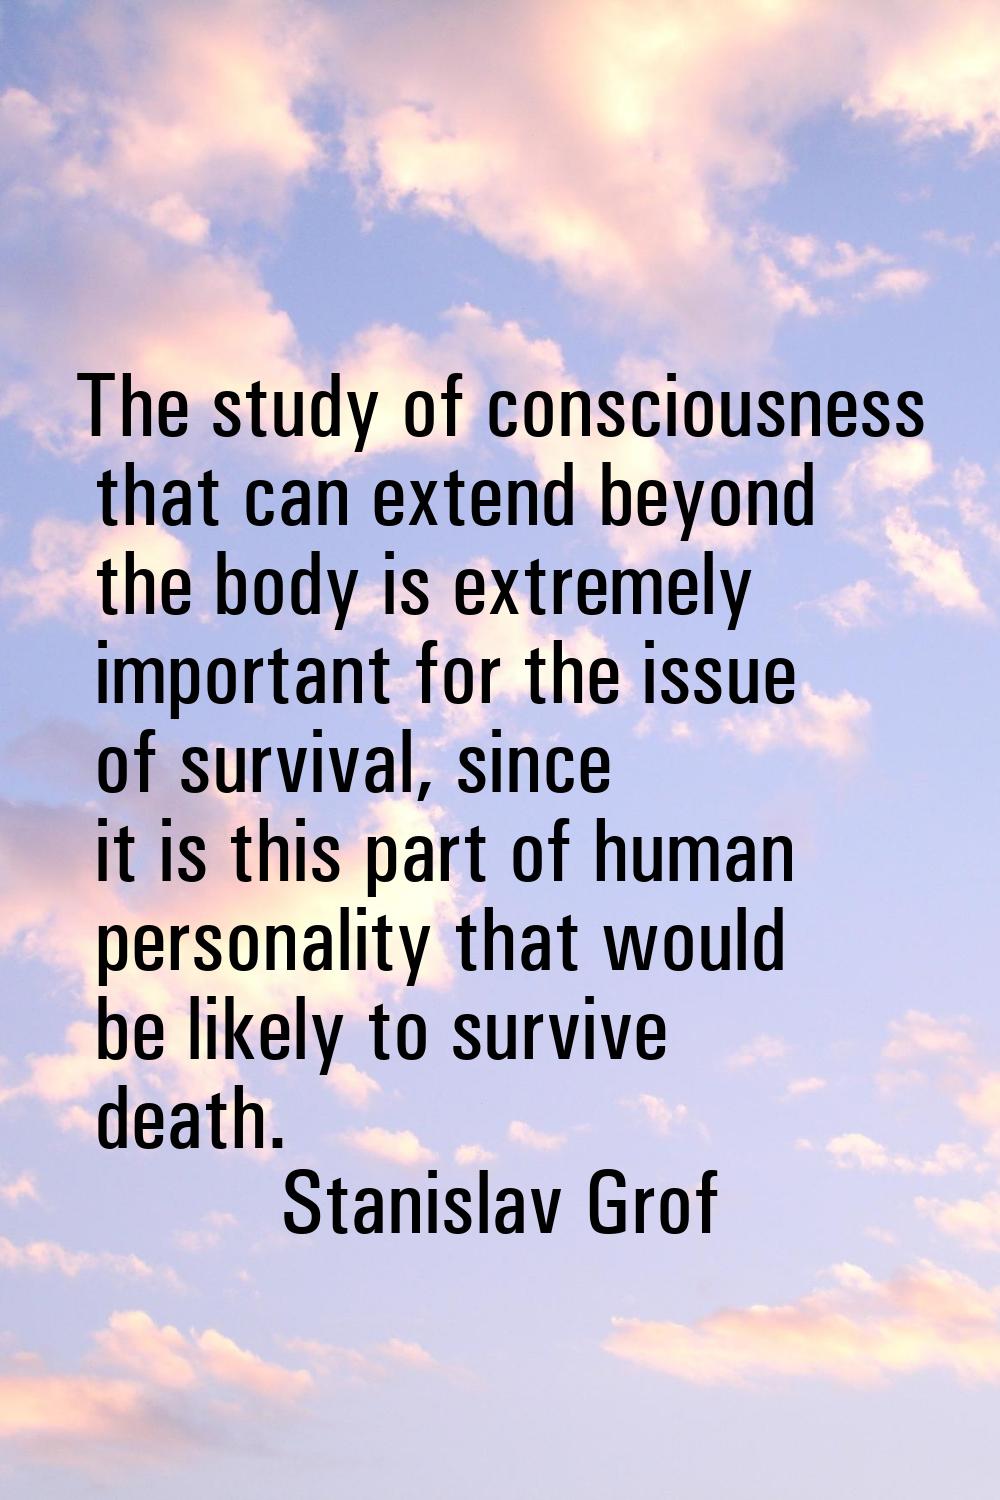 The study of consciousness that can extend beyond the body is extremely important for the issue of 